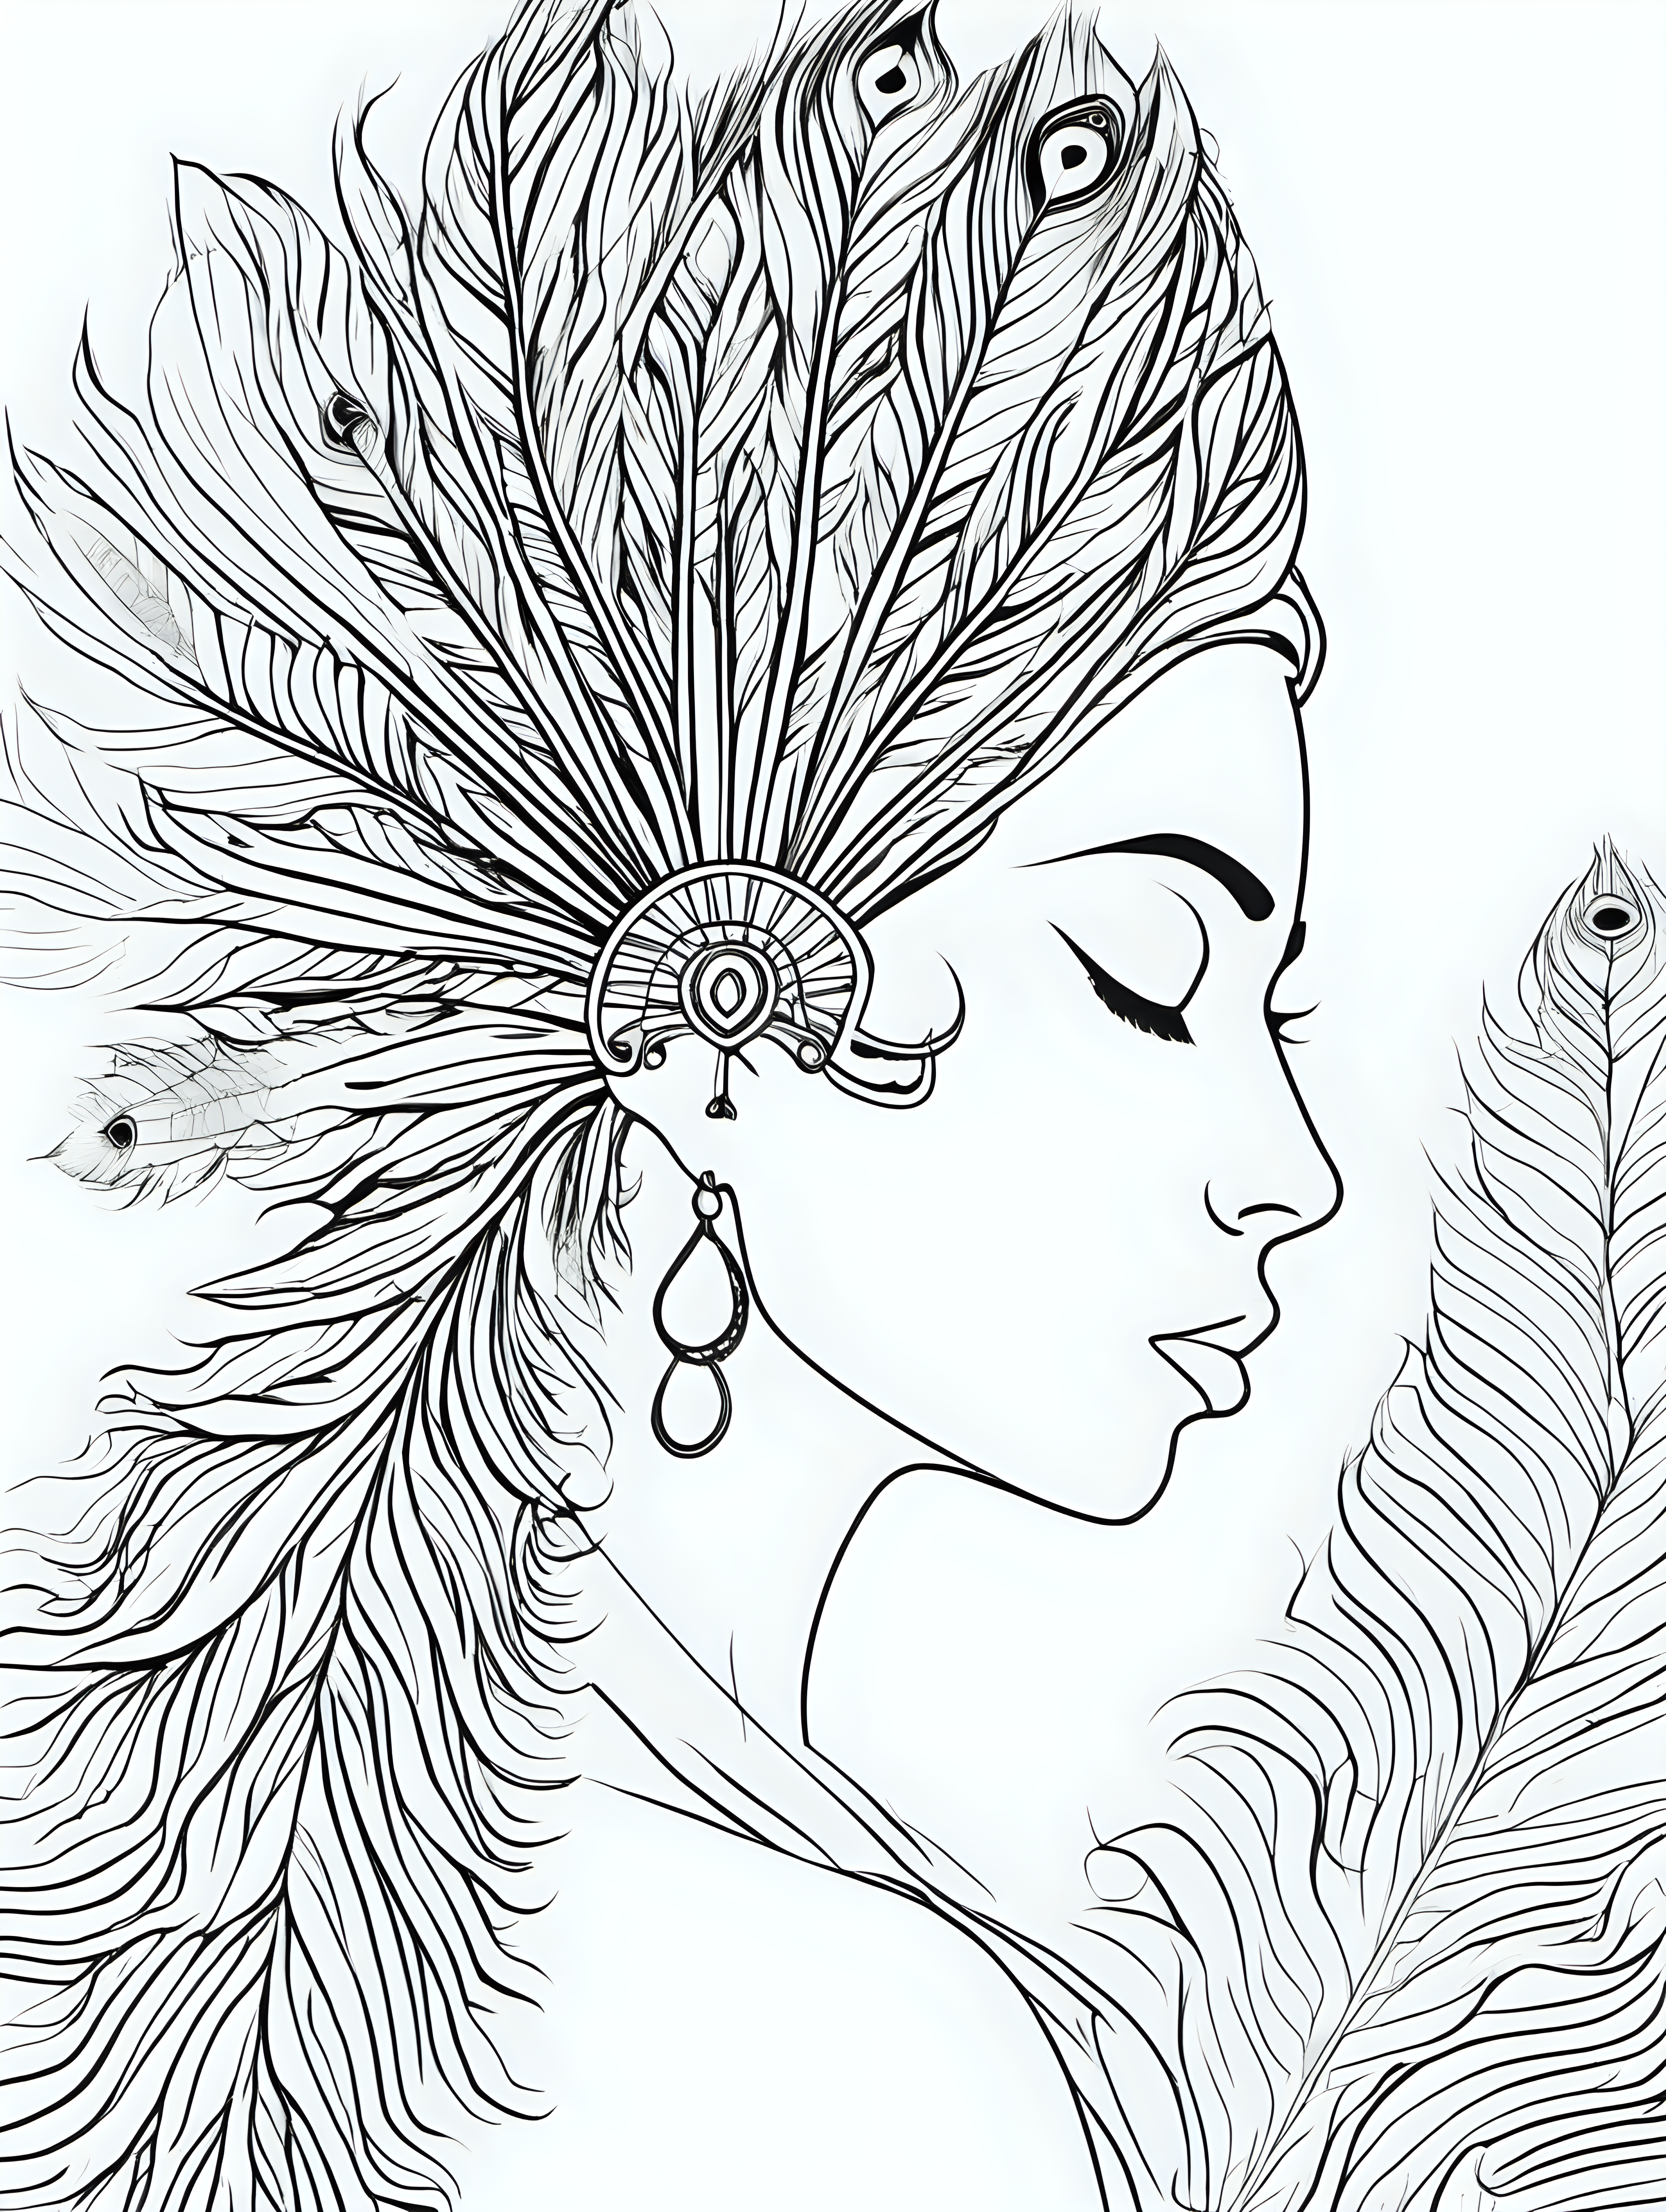 peacock feather woman ,coloring page, simple draw, no colors, 